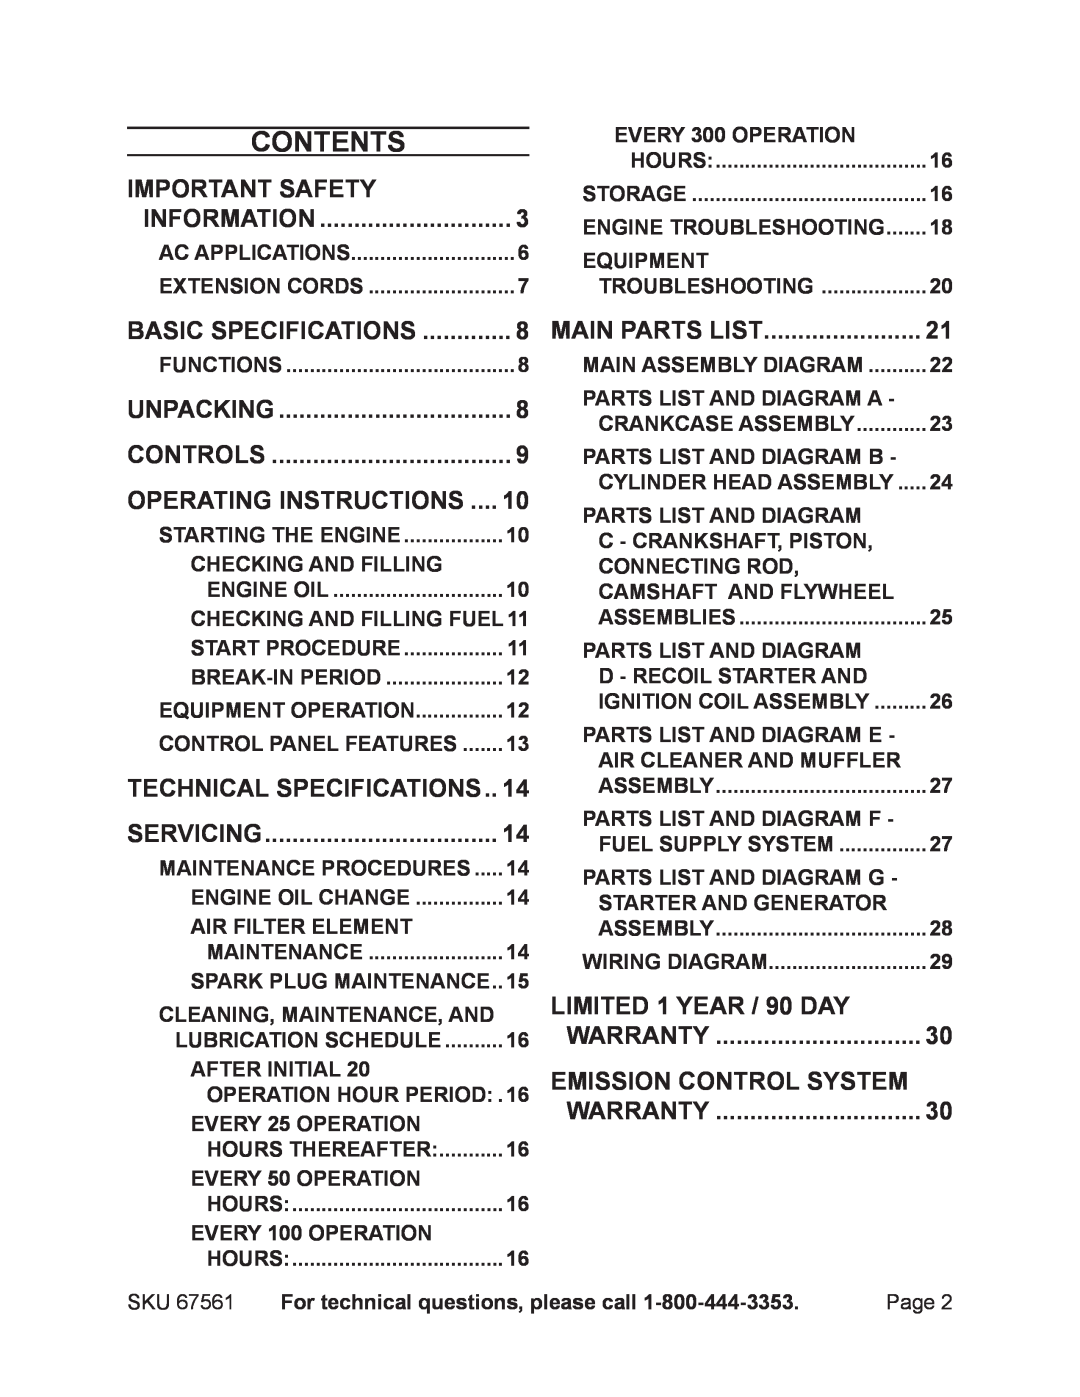 Chicago Electric 67561 manual Contents 